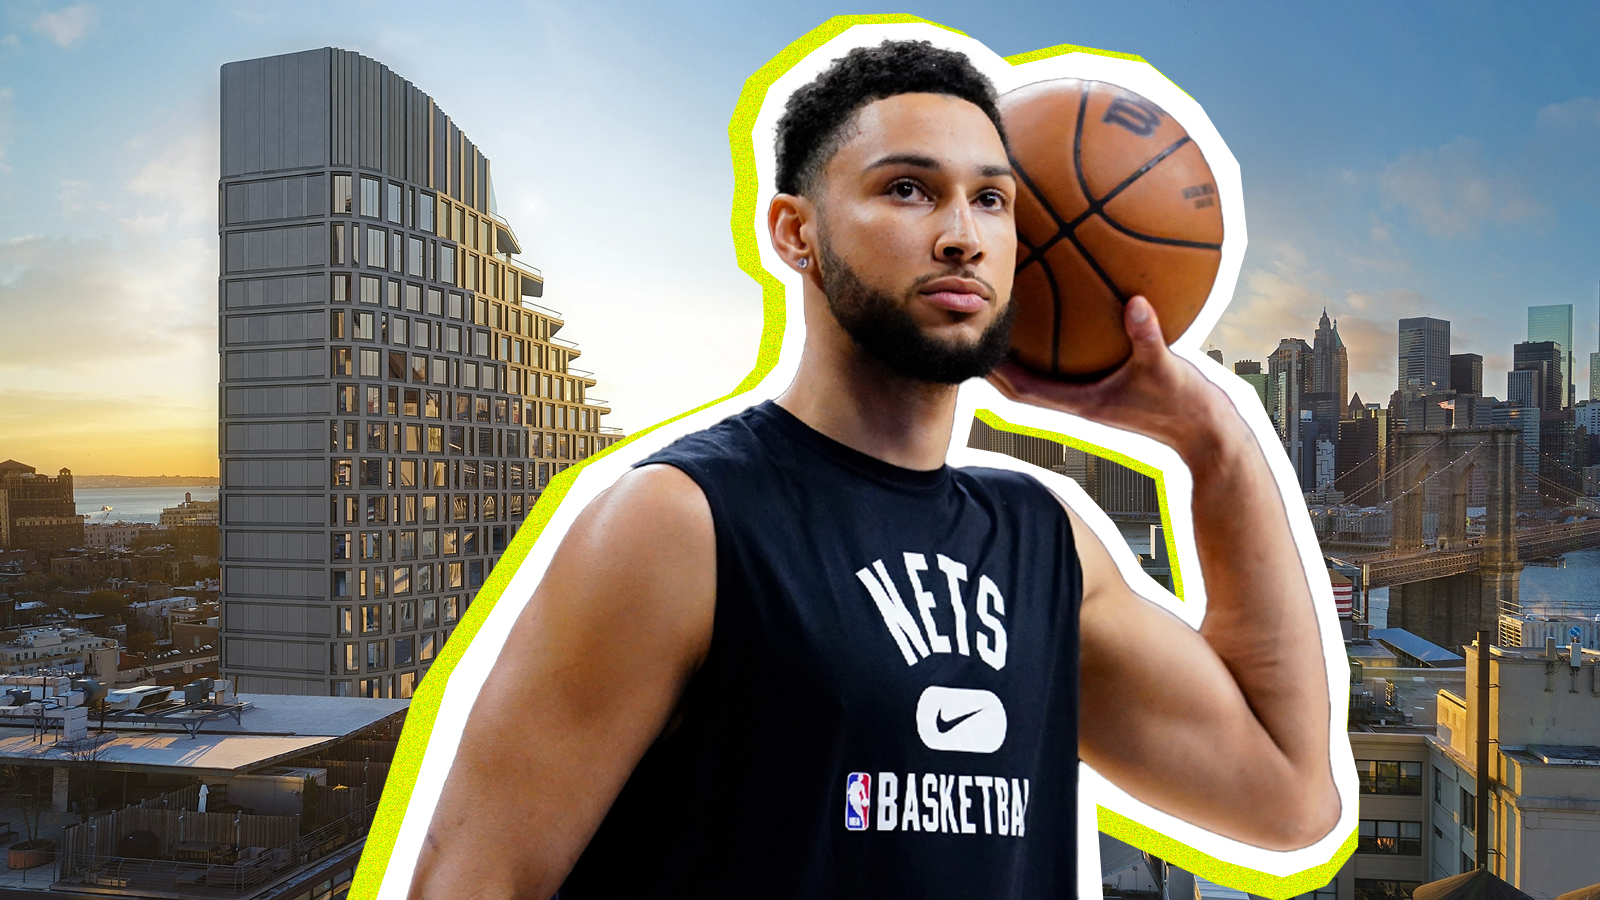 Ben Simmons Secures The Bag With Luxurious Louis Vuitton Luggage